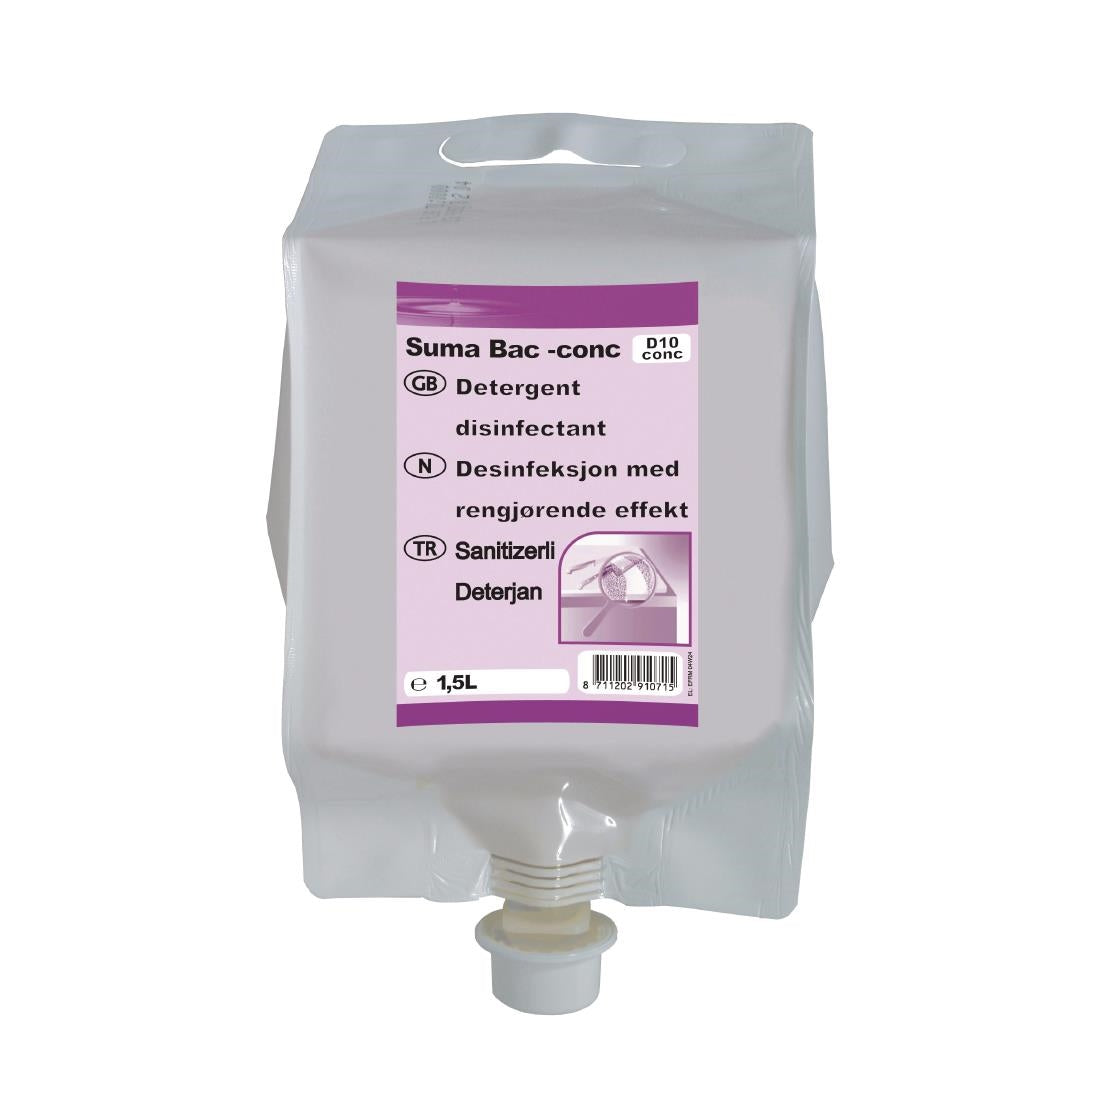 CX805 Suma Bac D10 Cleaner and Disinfectant Super Concentrate 1.5Ltr JD Catering Equipment Solutions Ltd